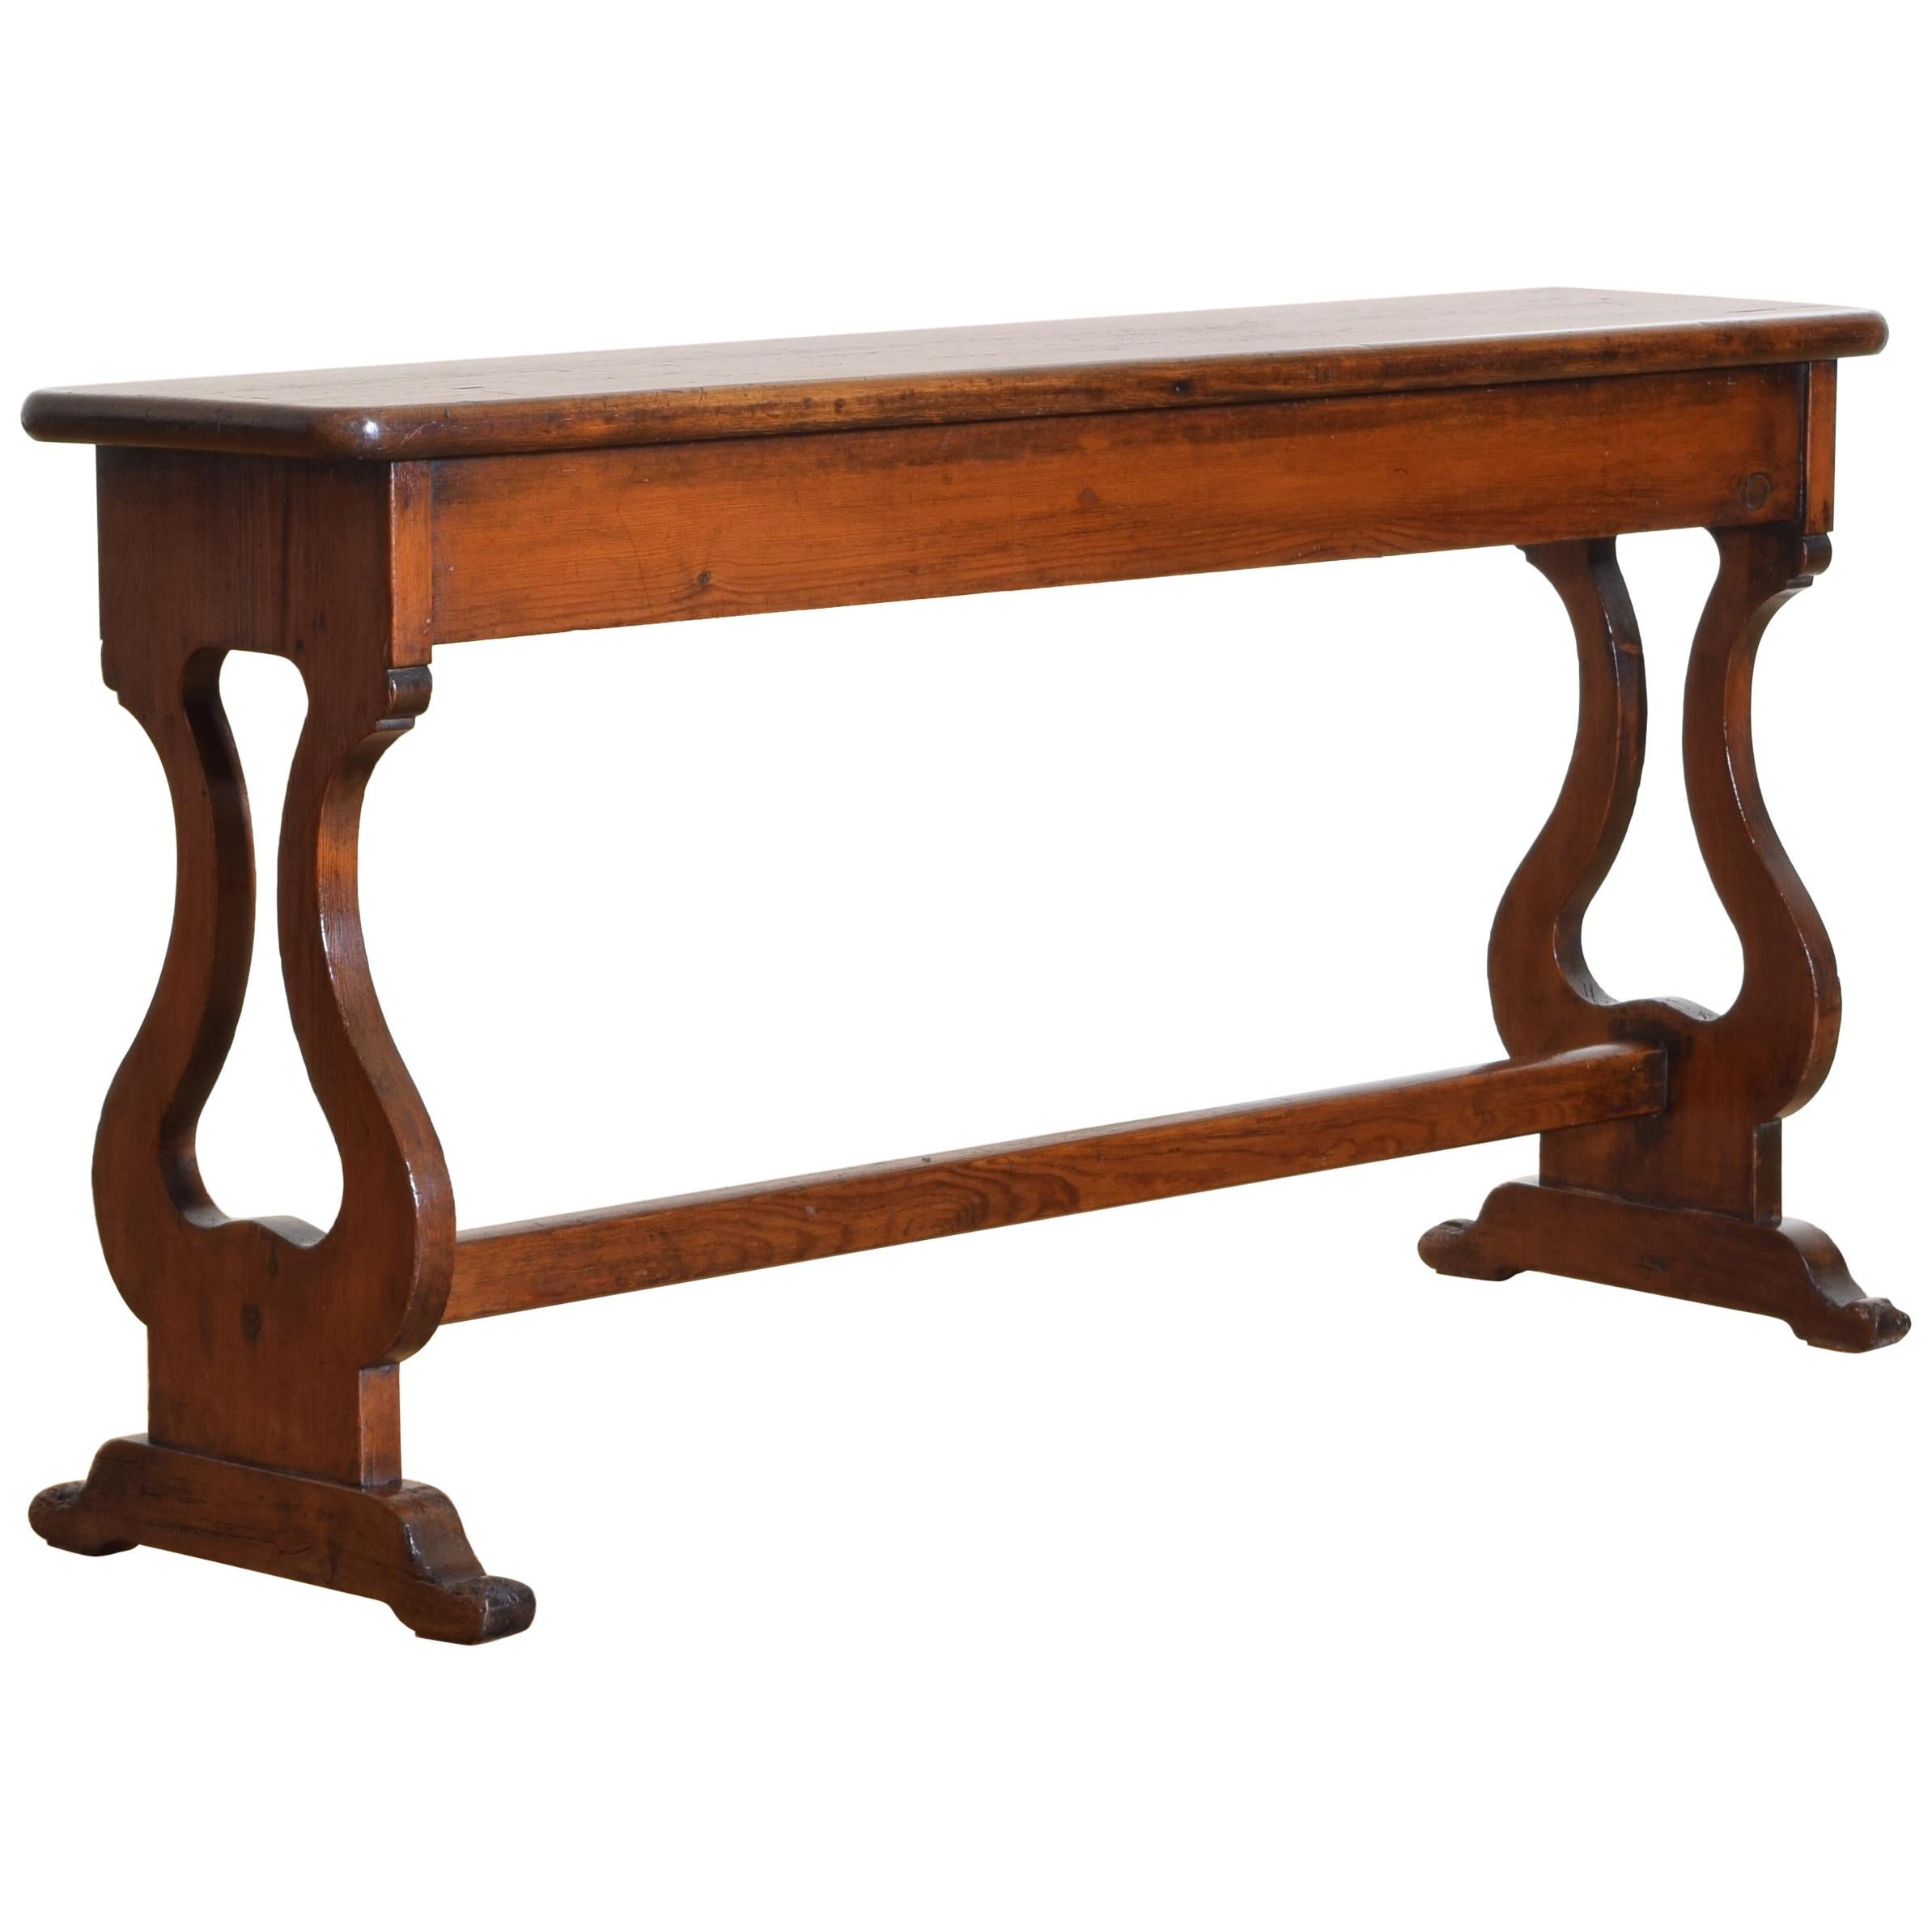 French Neoclassic Shaped Oak Bench, Second Half of the 19th Century